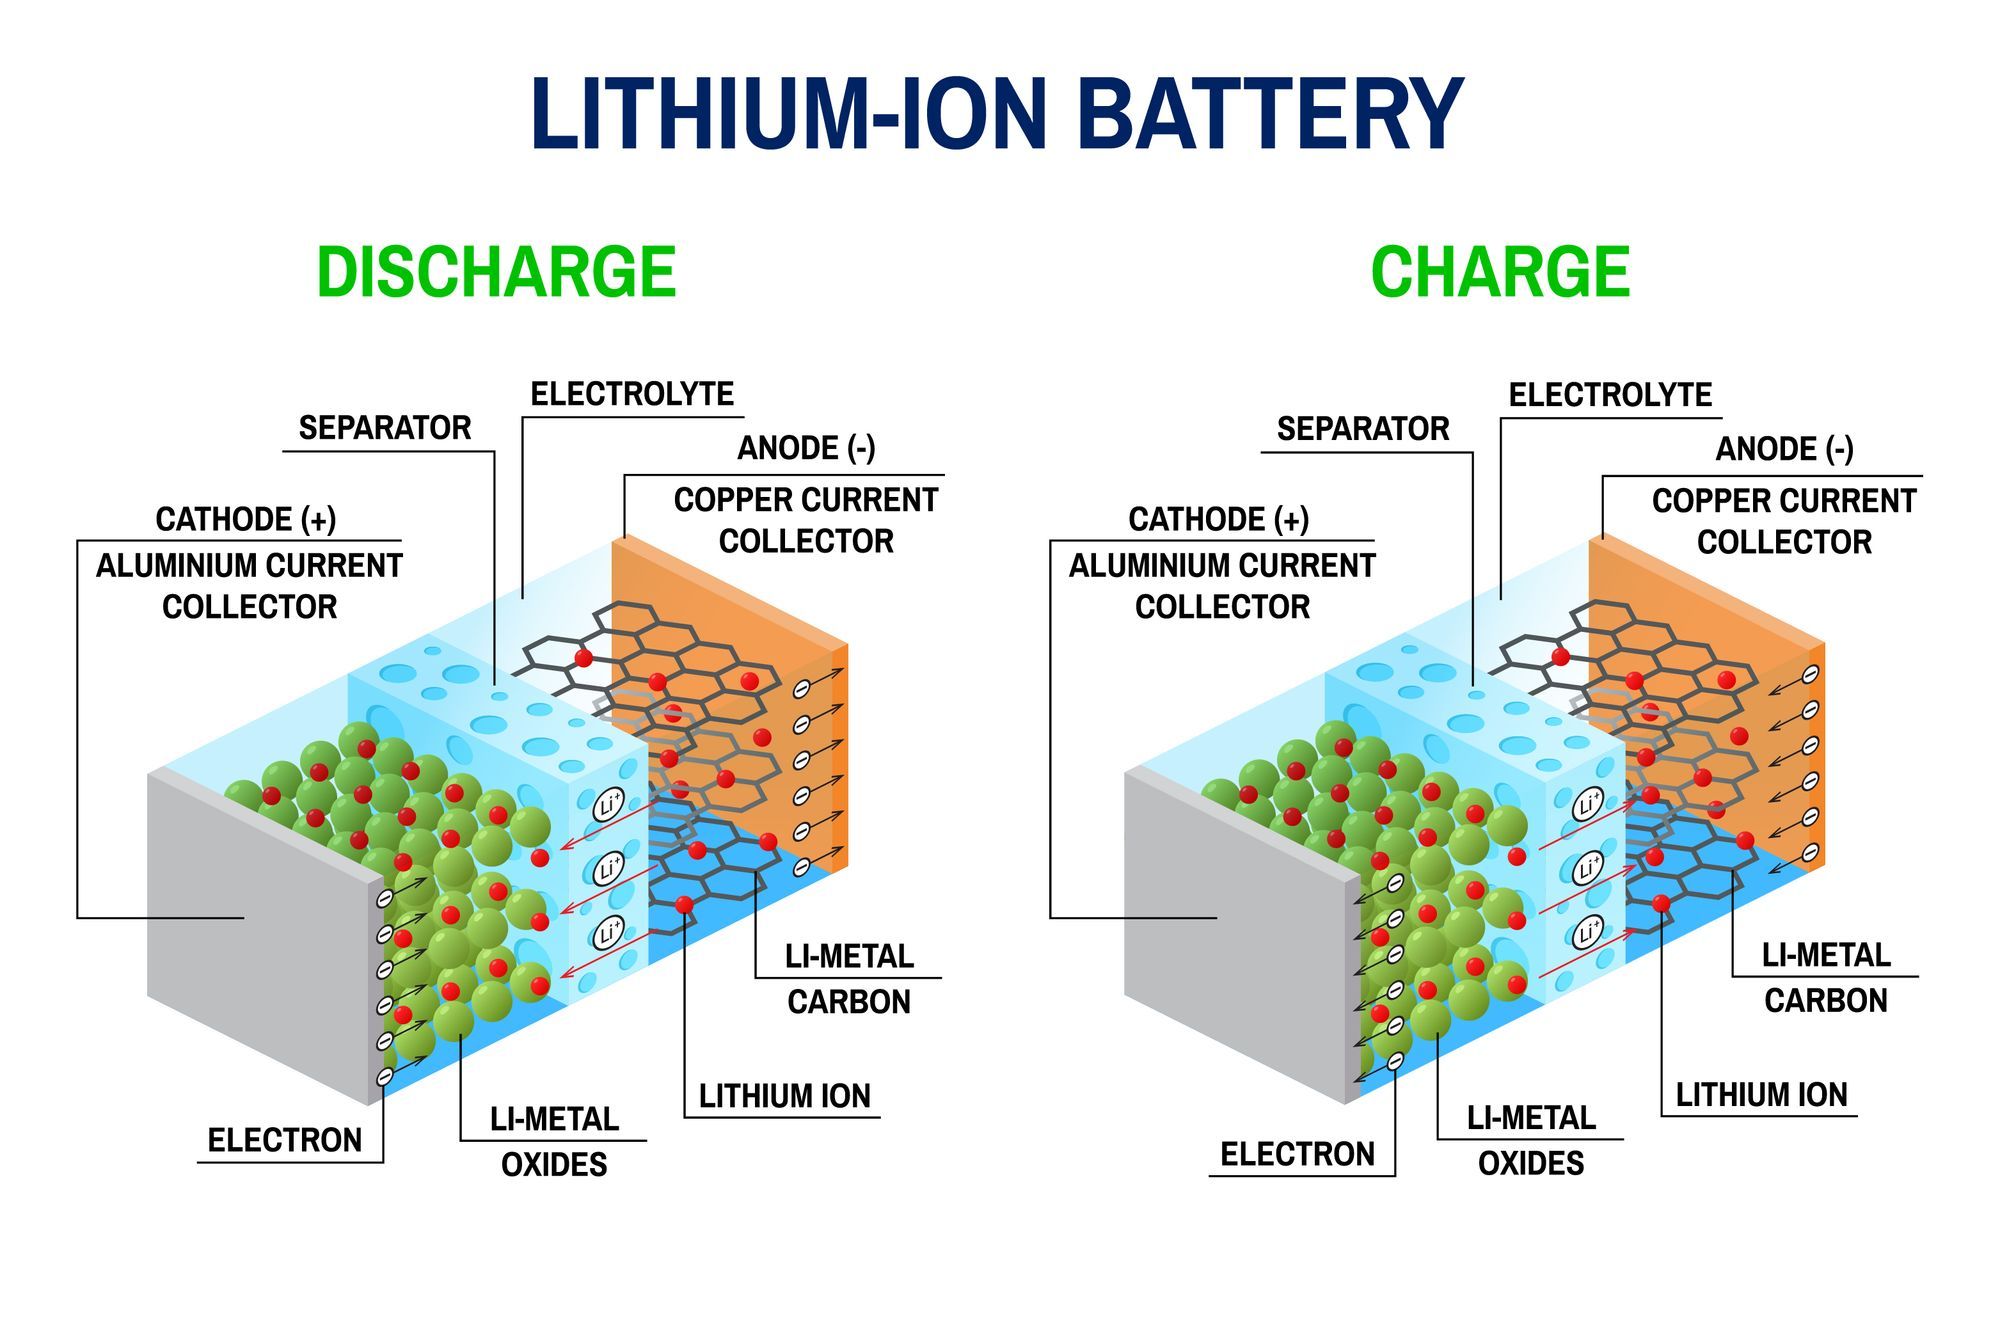 Lithiumion battery, how does it work?